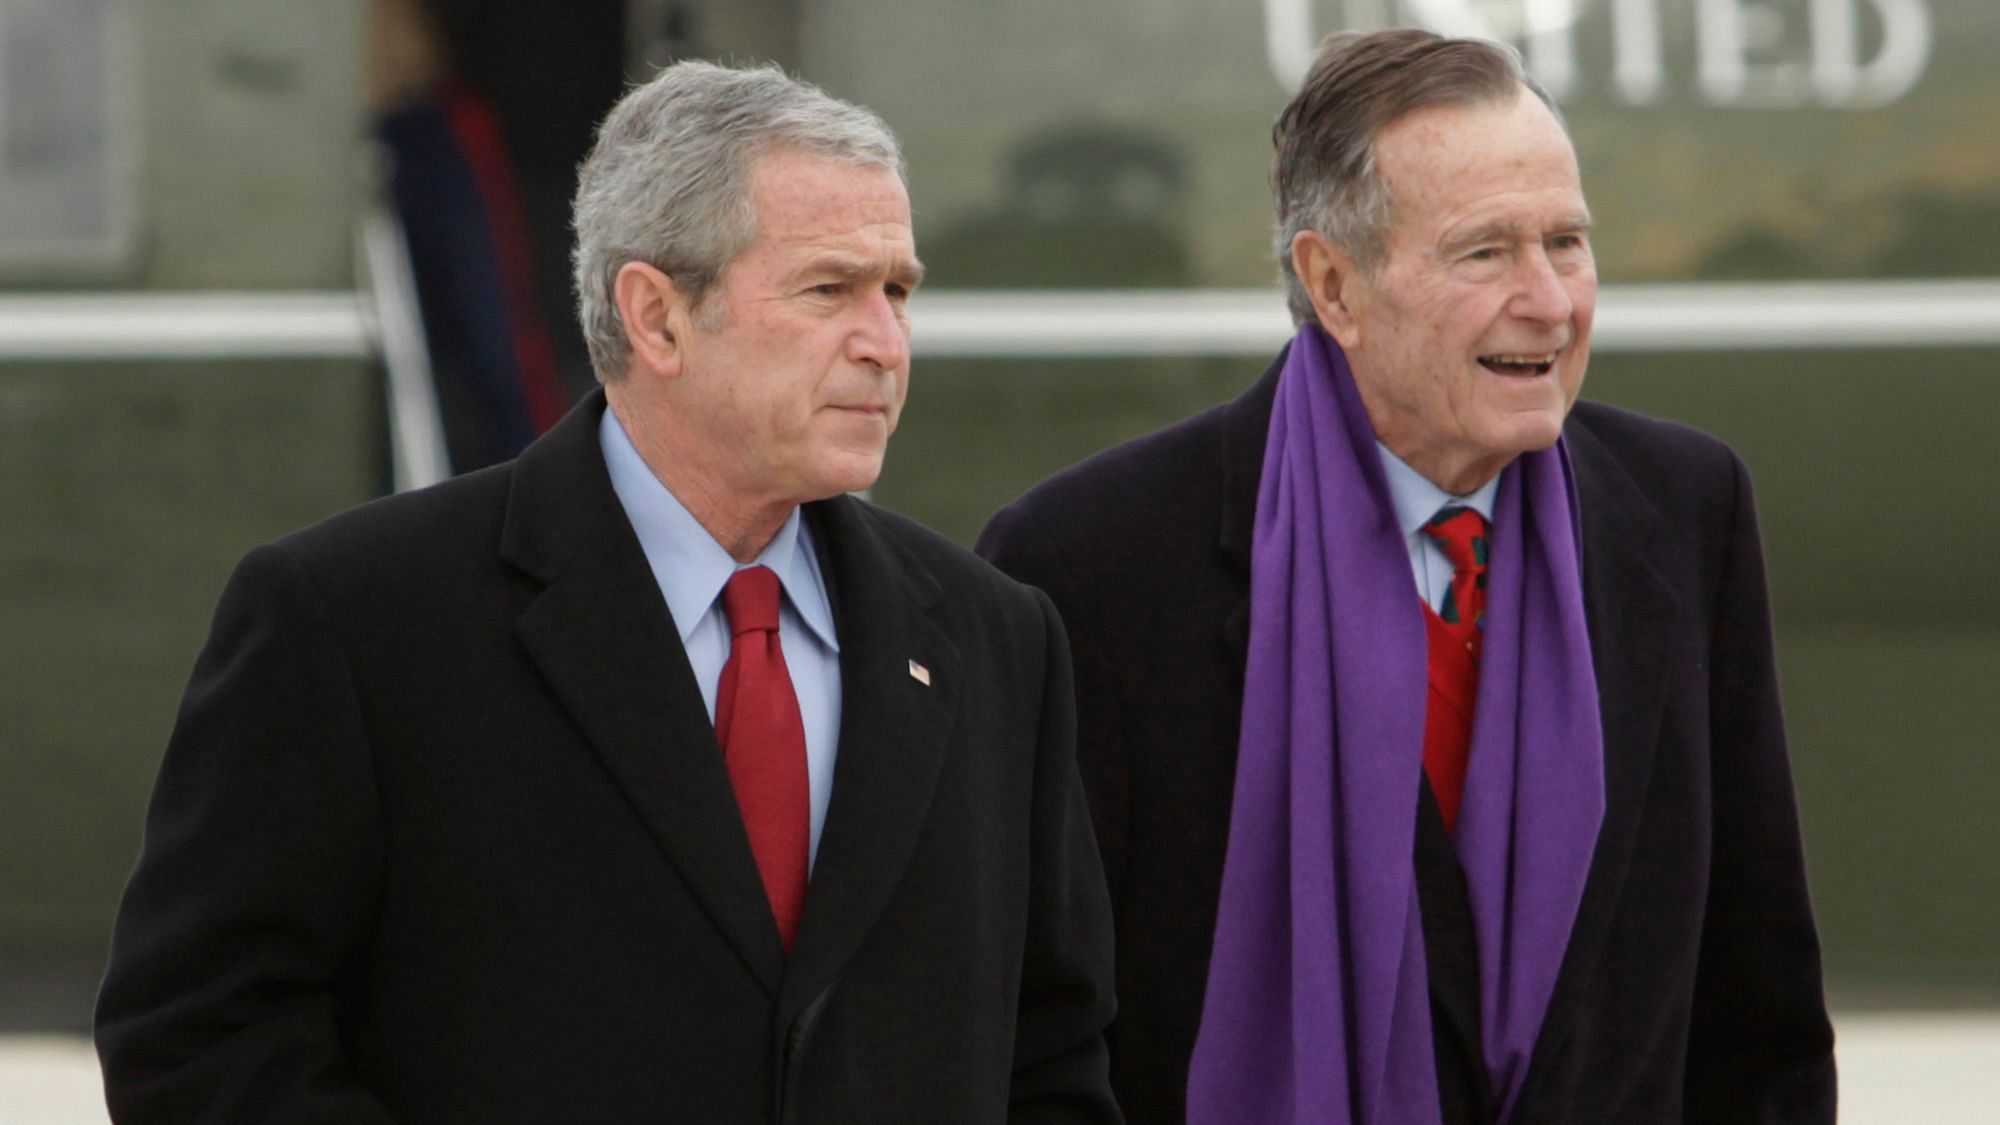 File photo of former US President George W Bush (L) walking with his father, another former US President George HW Bush.